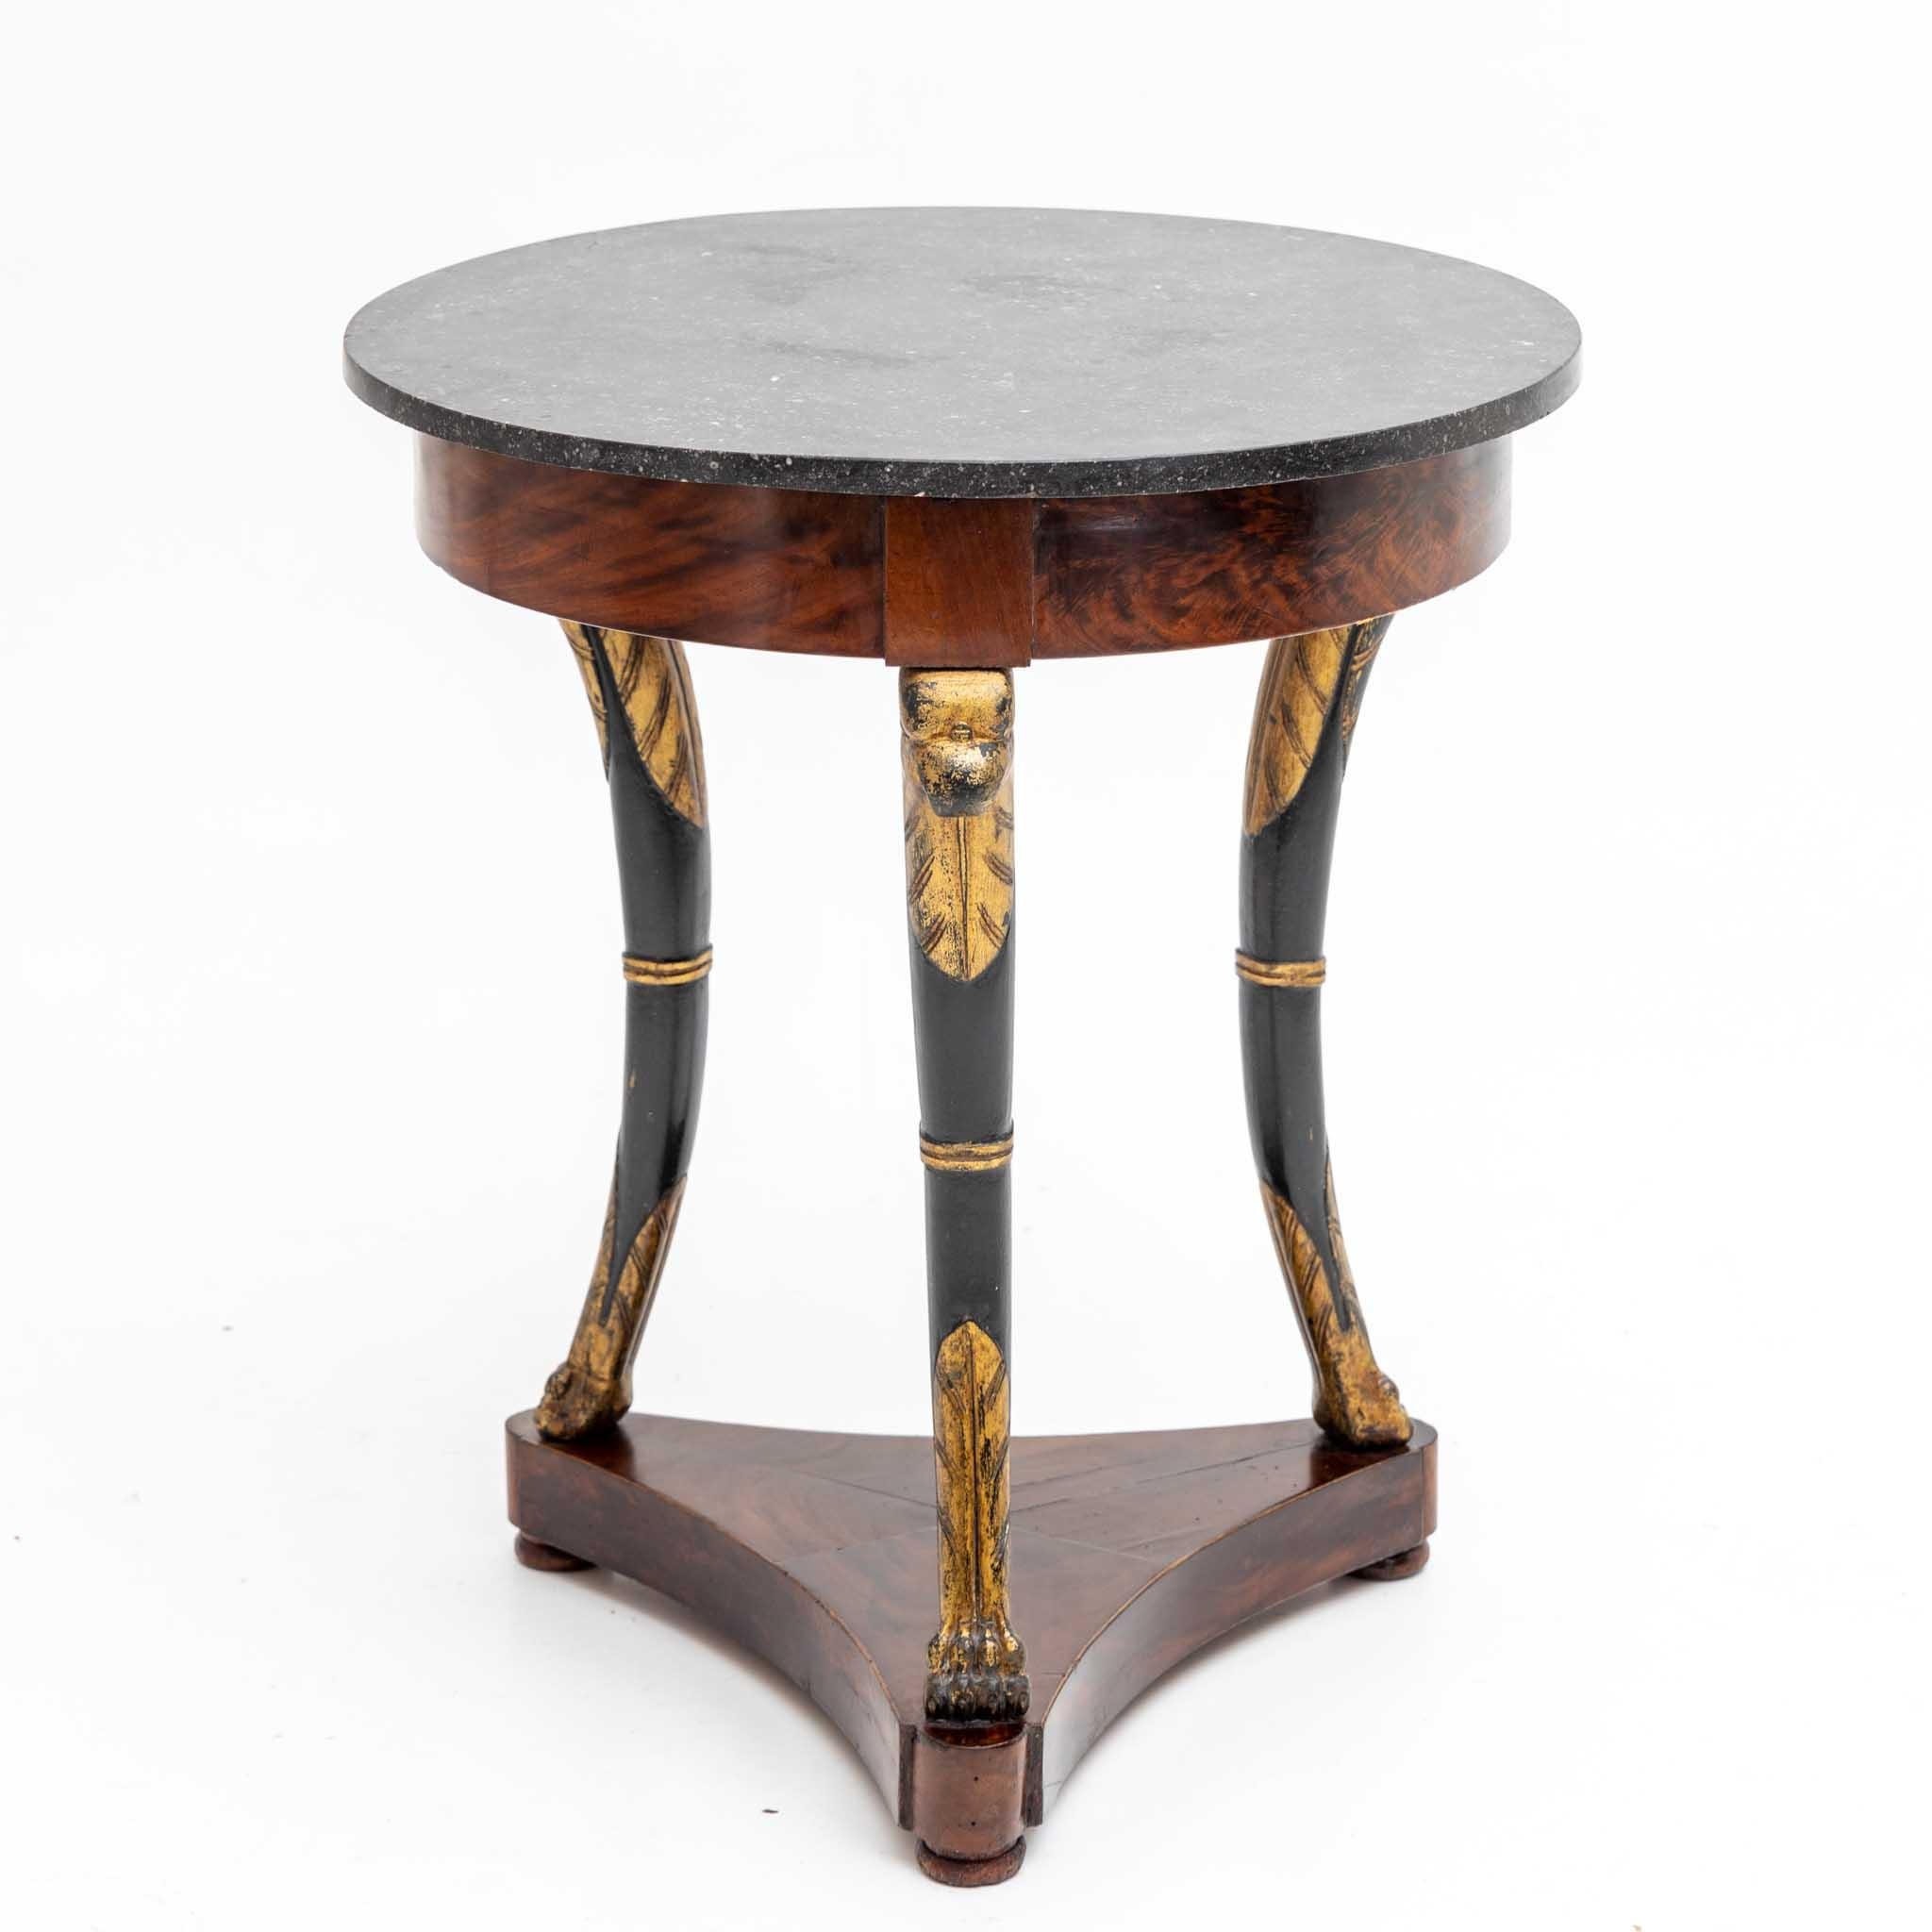 A round, antique French Empire side table made of hand crafted shellac polished, partly veneered Honduran Mahogany in good condition. The detailed small center table is composed with a black marble top, standing on three arched legs, supported by a